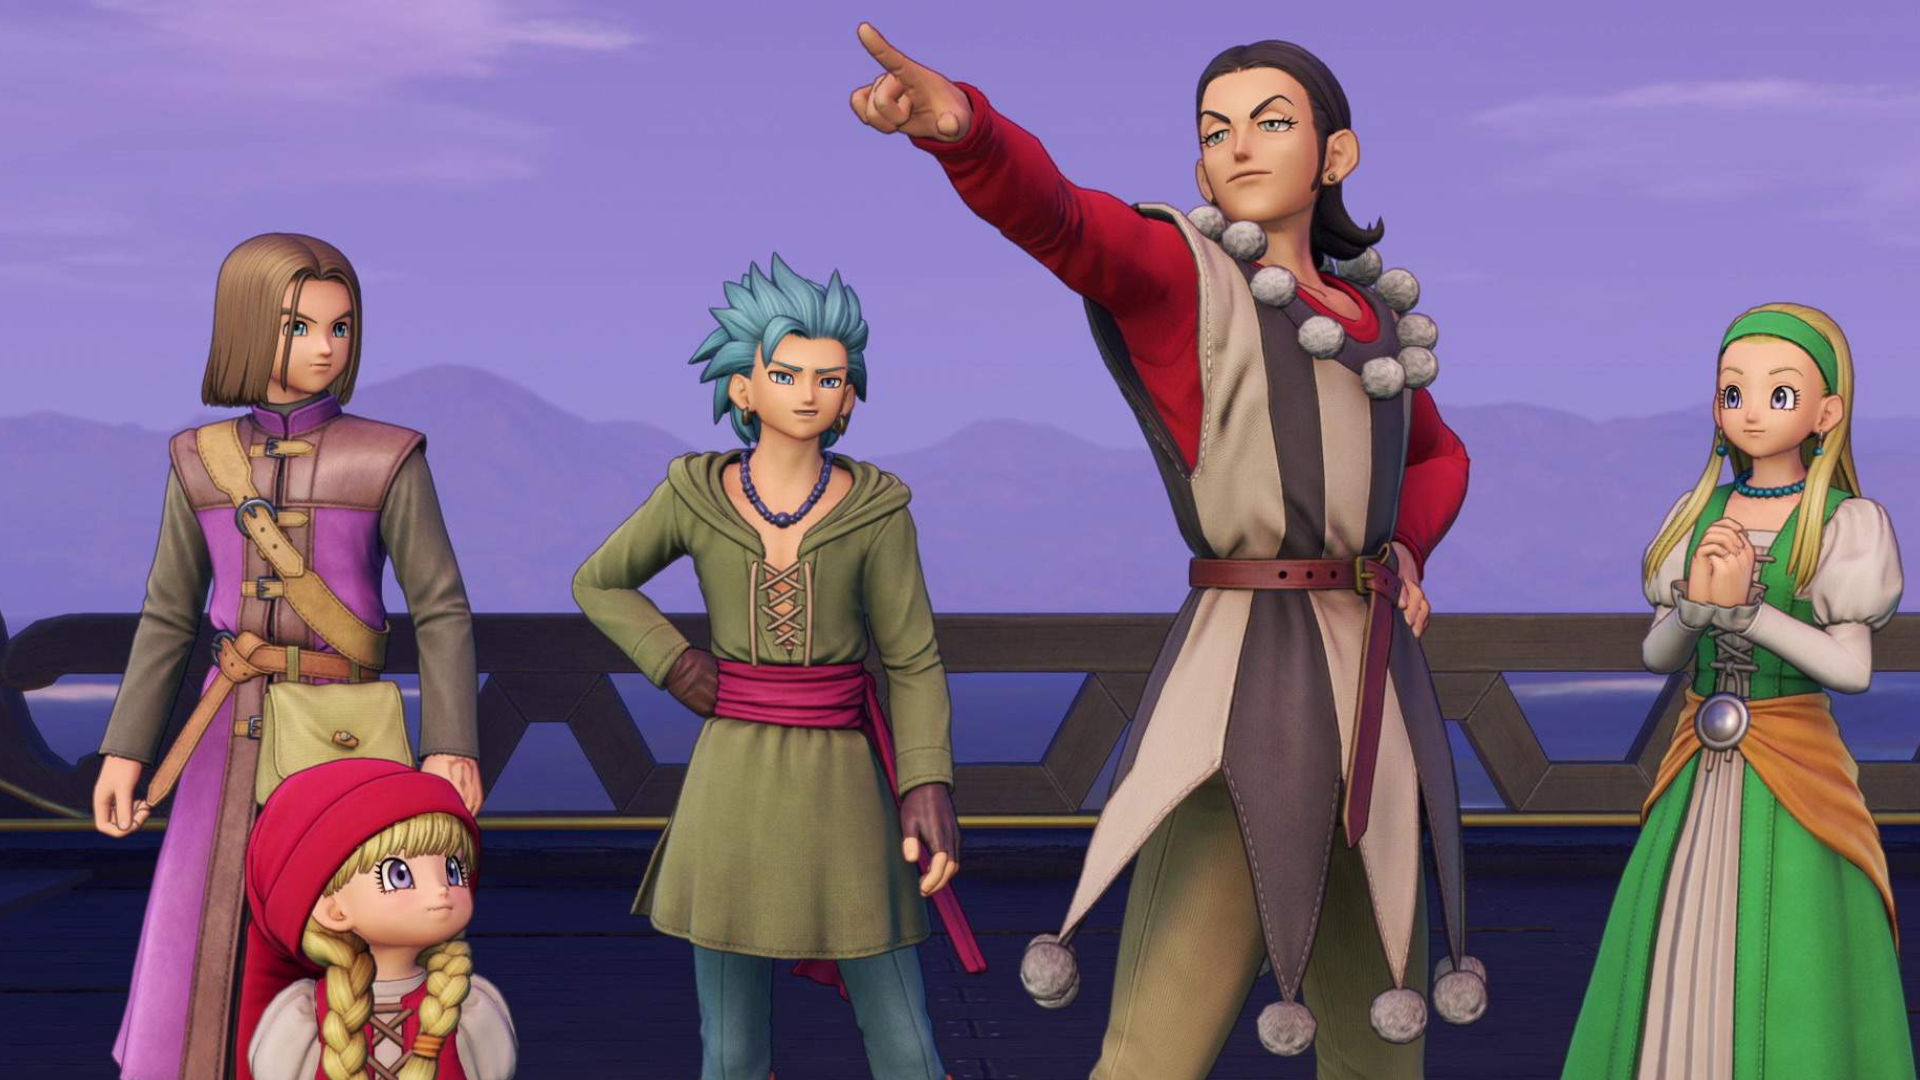 Review: Dragon Quest VIII is a great entry point into a storied